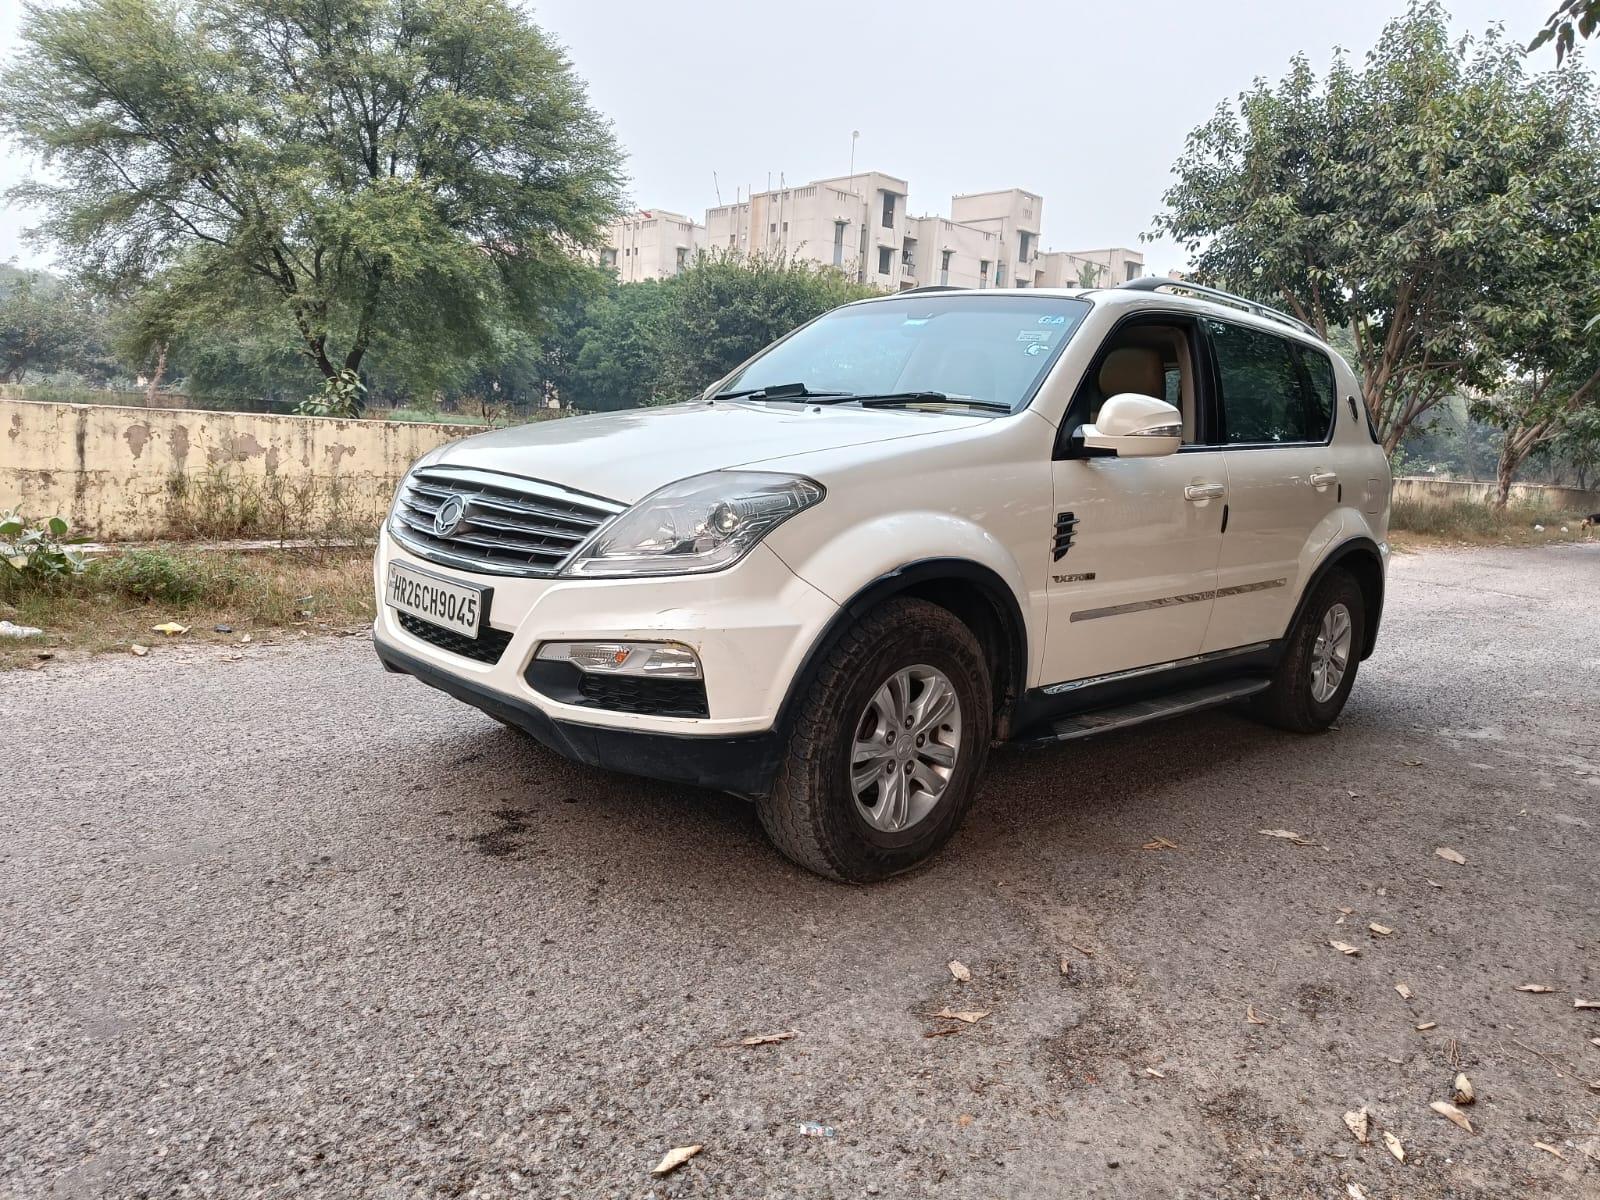 Used 2014 SsangYong Rexton W, Amberhai, New Delhi